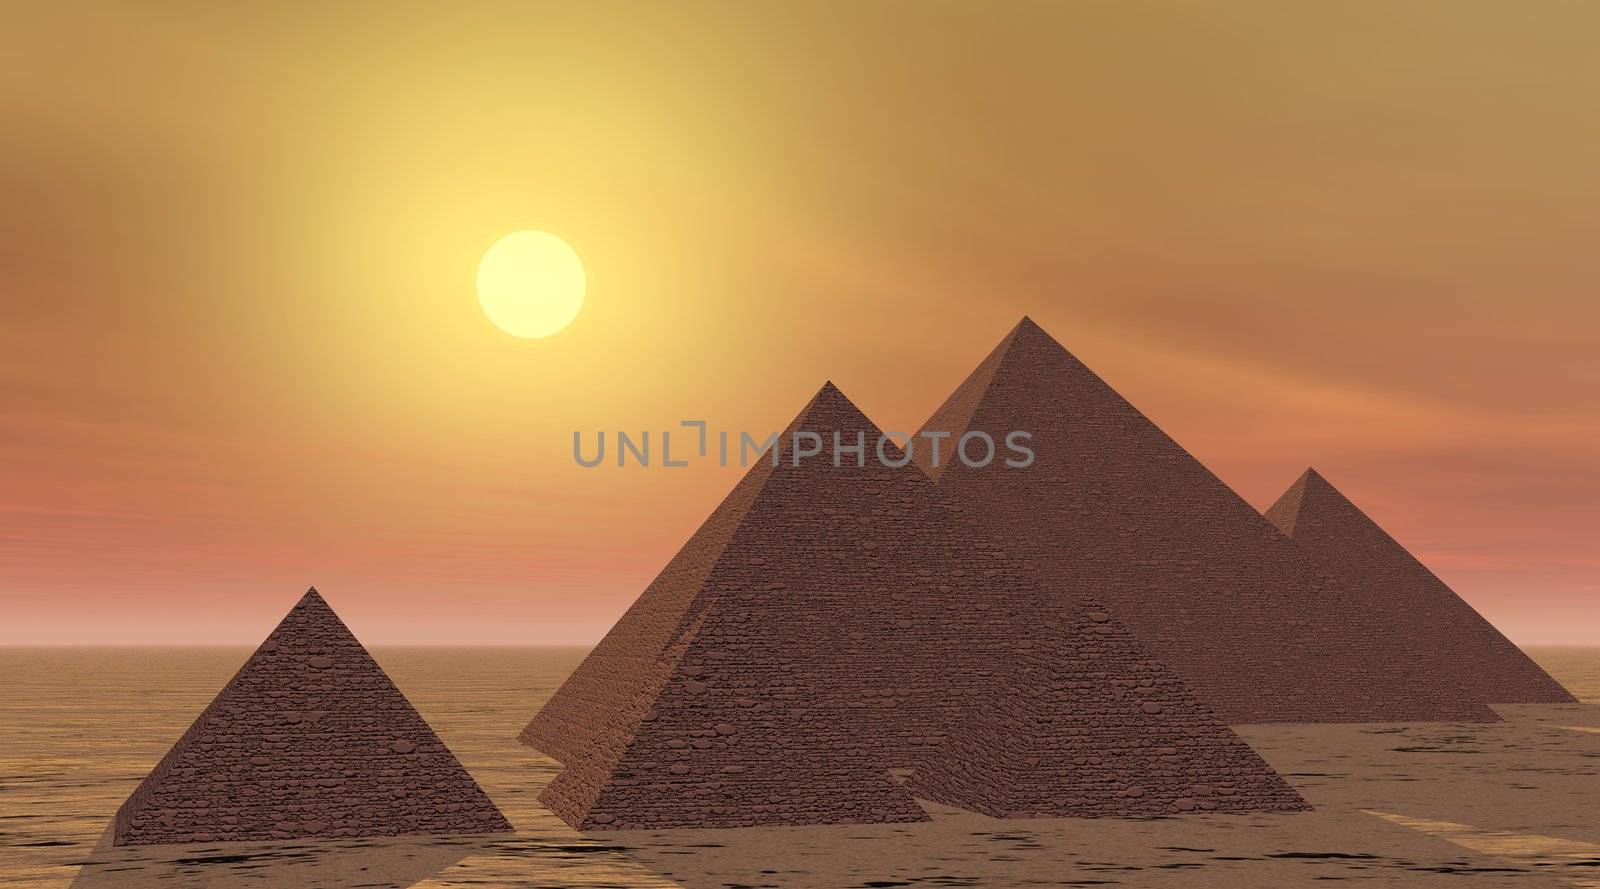 Mysterious pyramids by sunset by Elenaphotos21